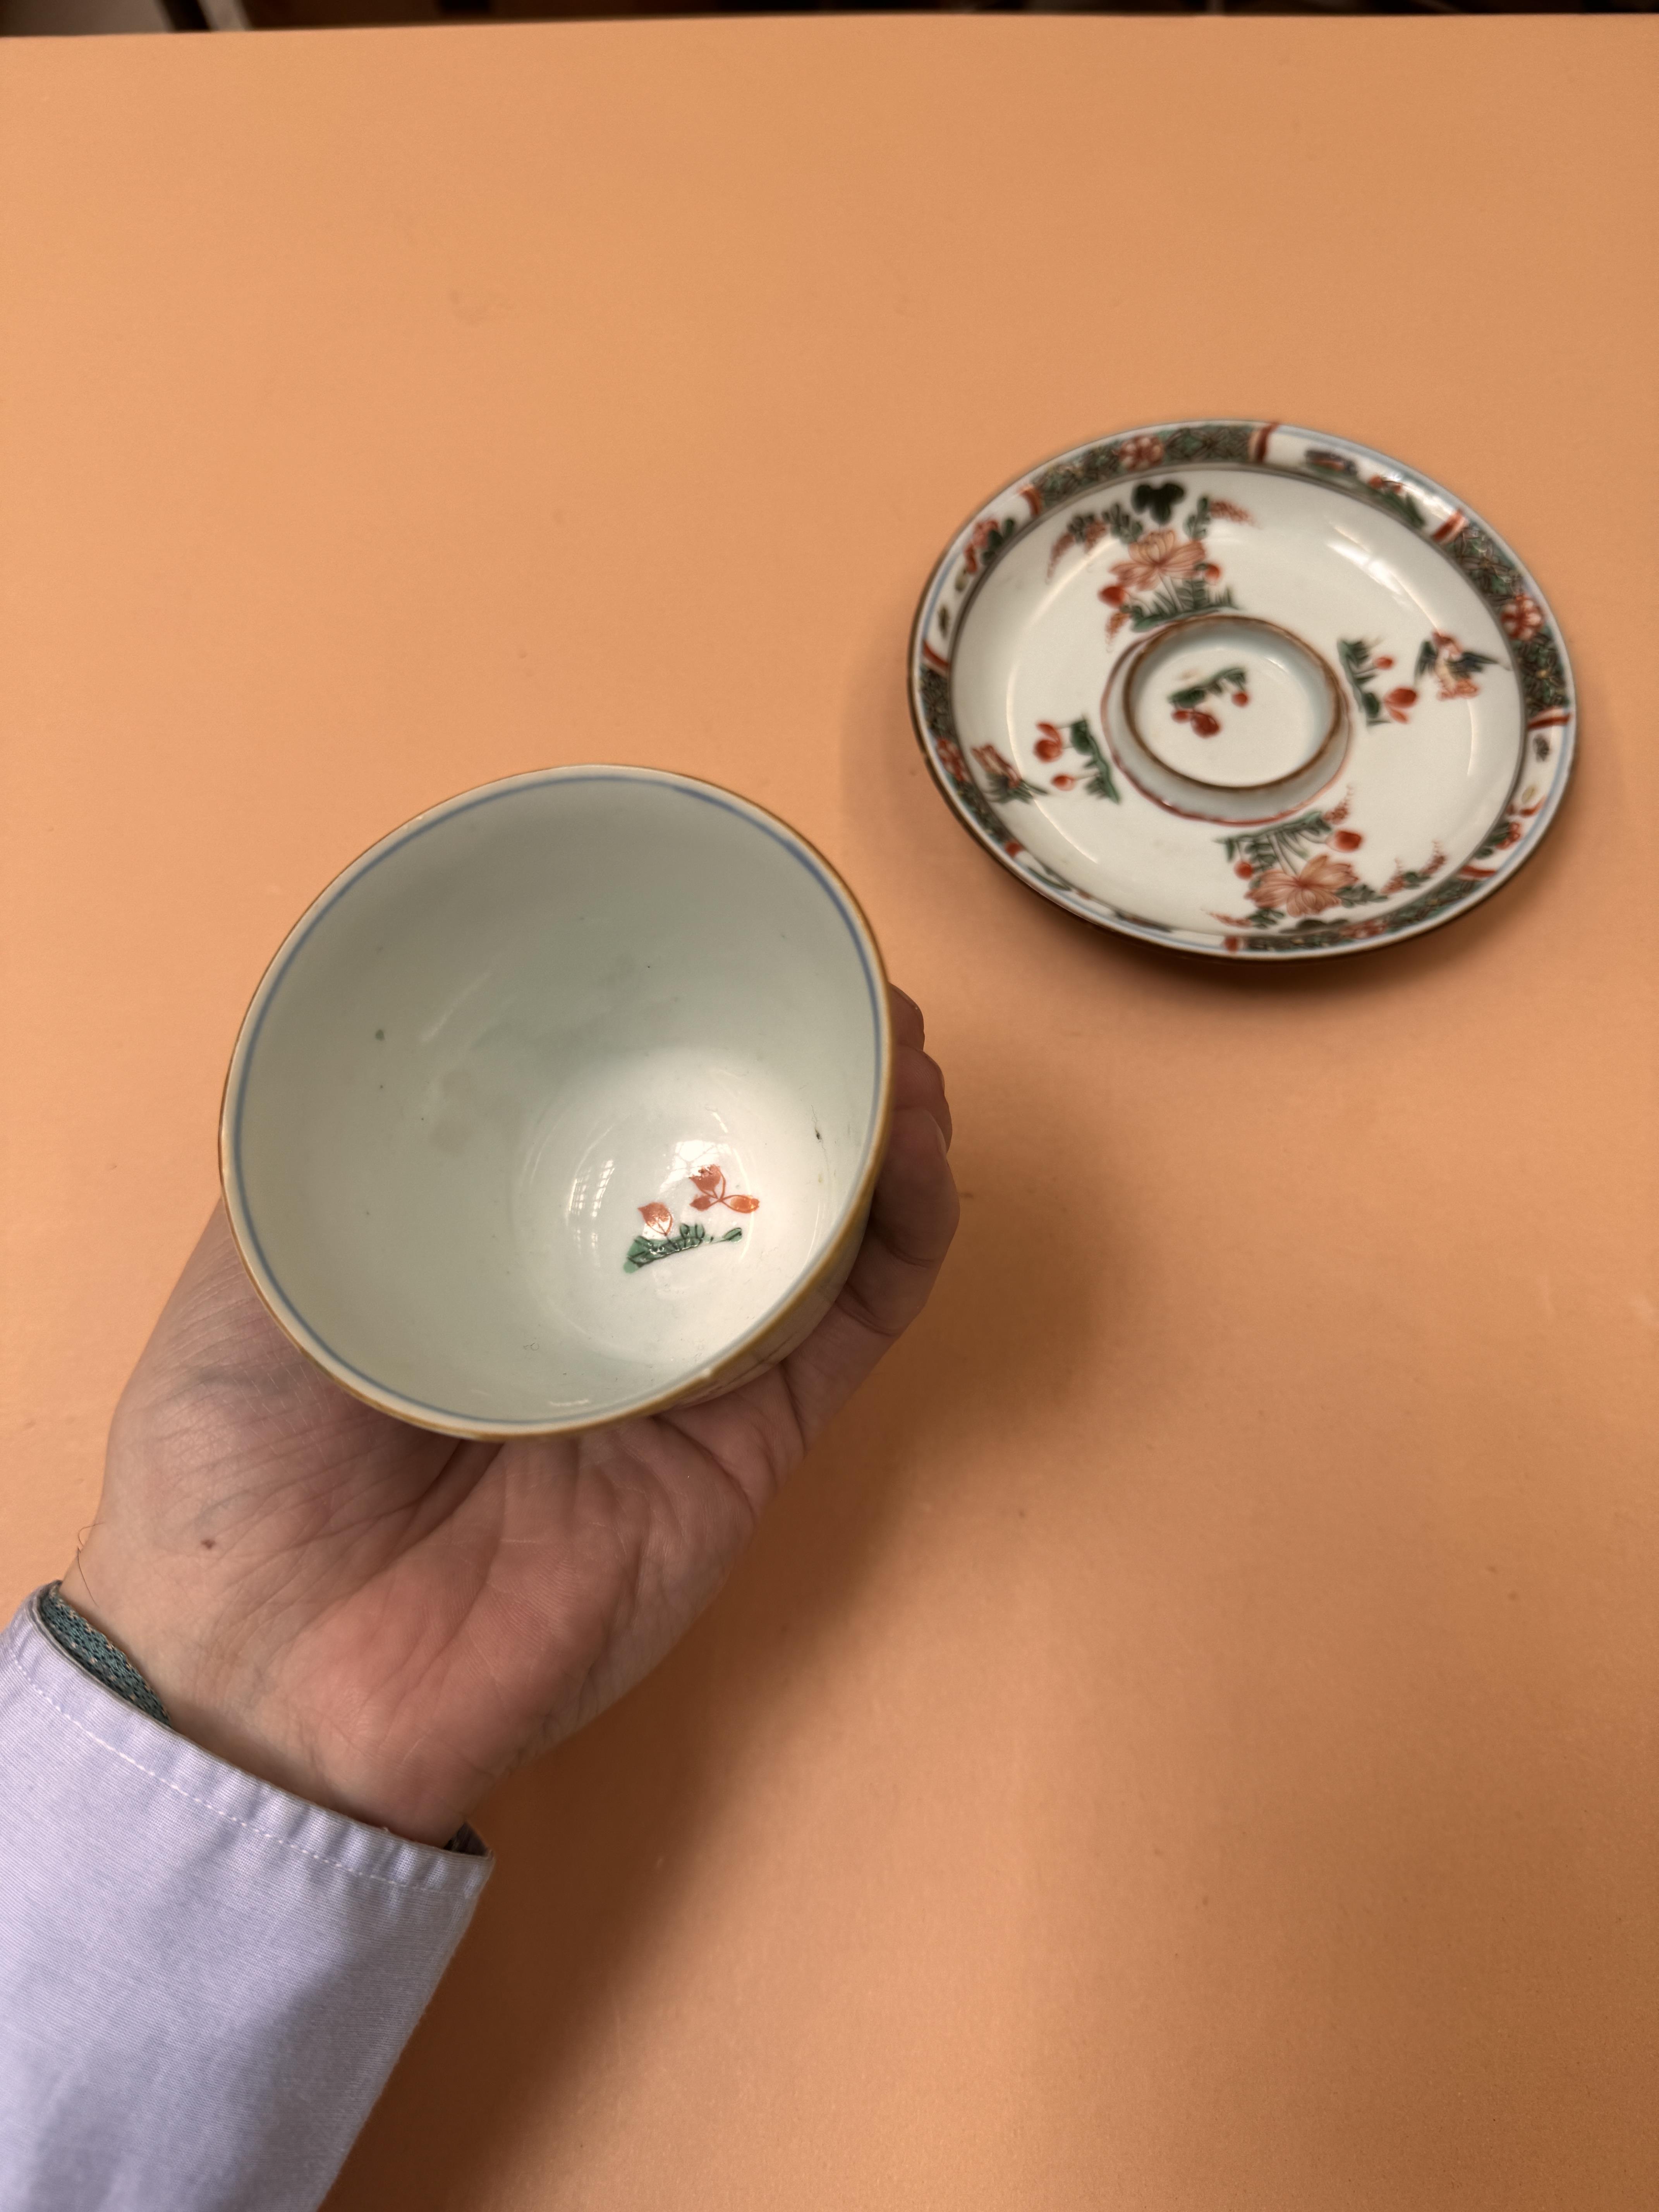 A CHINESE FAMILLE-VERTE CUP AND SAUCER 清康熙 五彩花鳥圖盃連盤 - Image 3 of 18